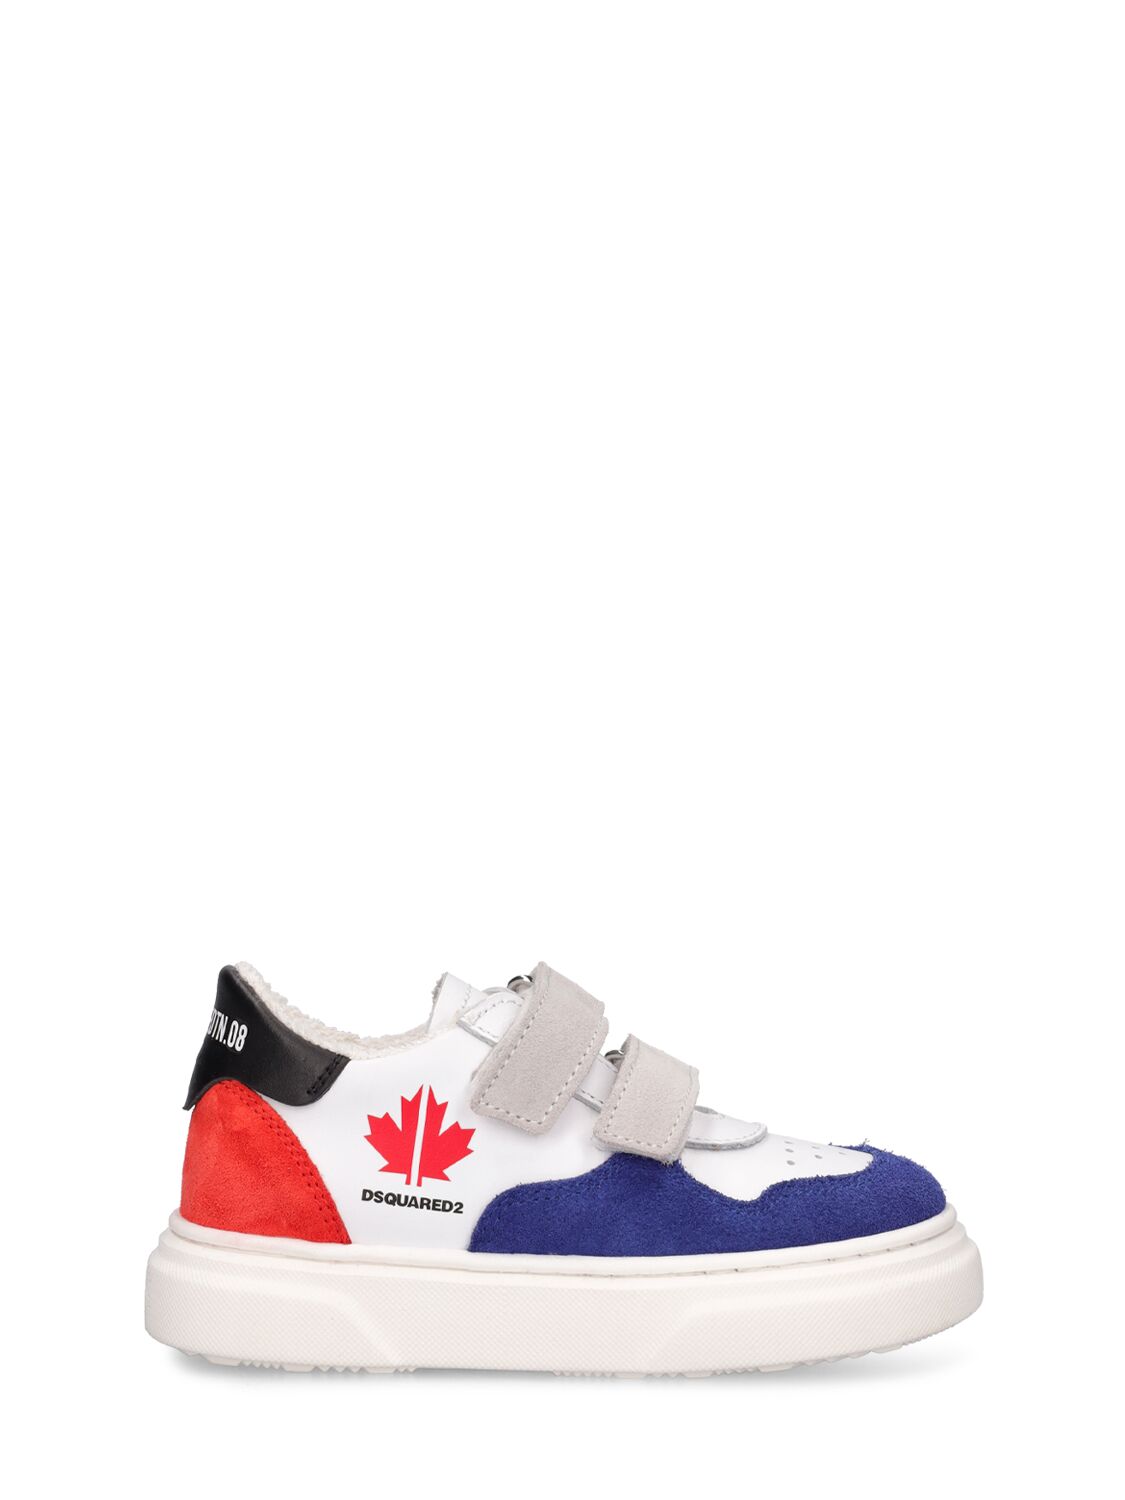 Dsquared2 Kids' Printed Leather Strap Sneakers In Blue,white